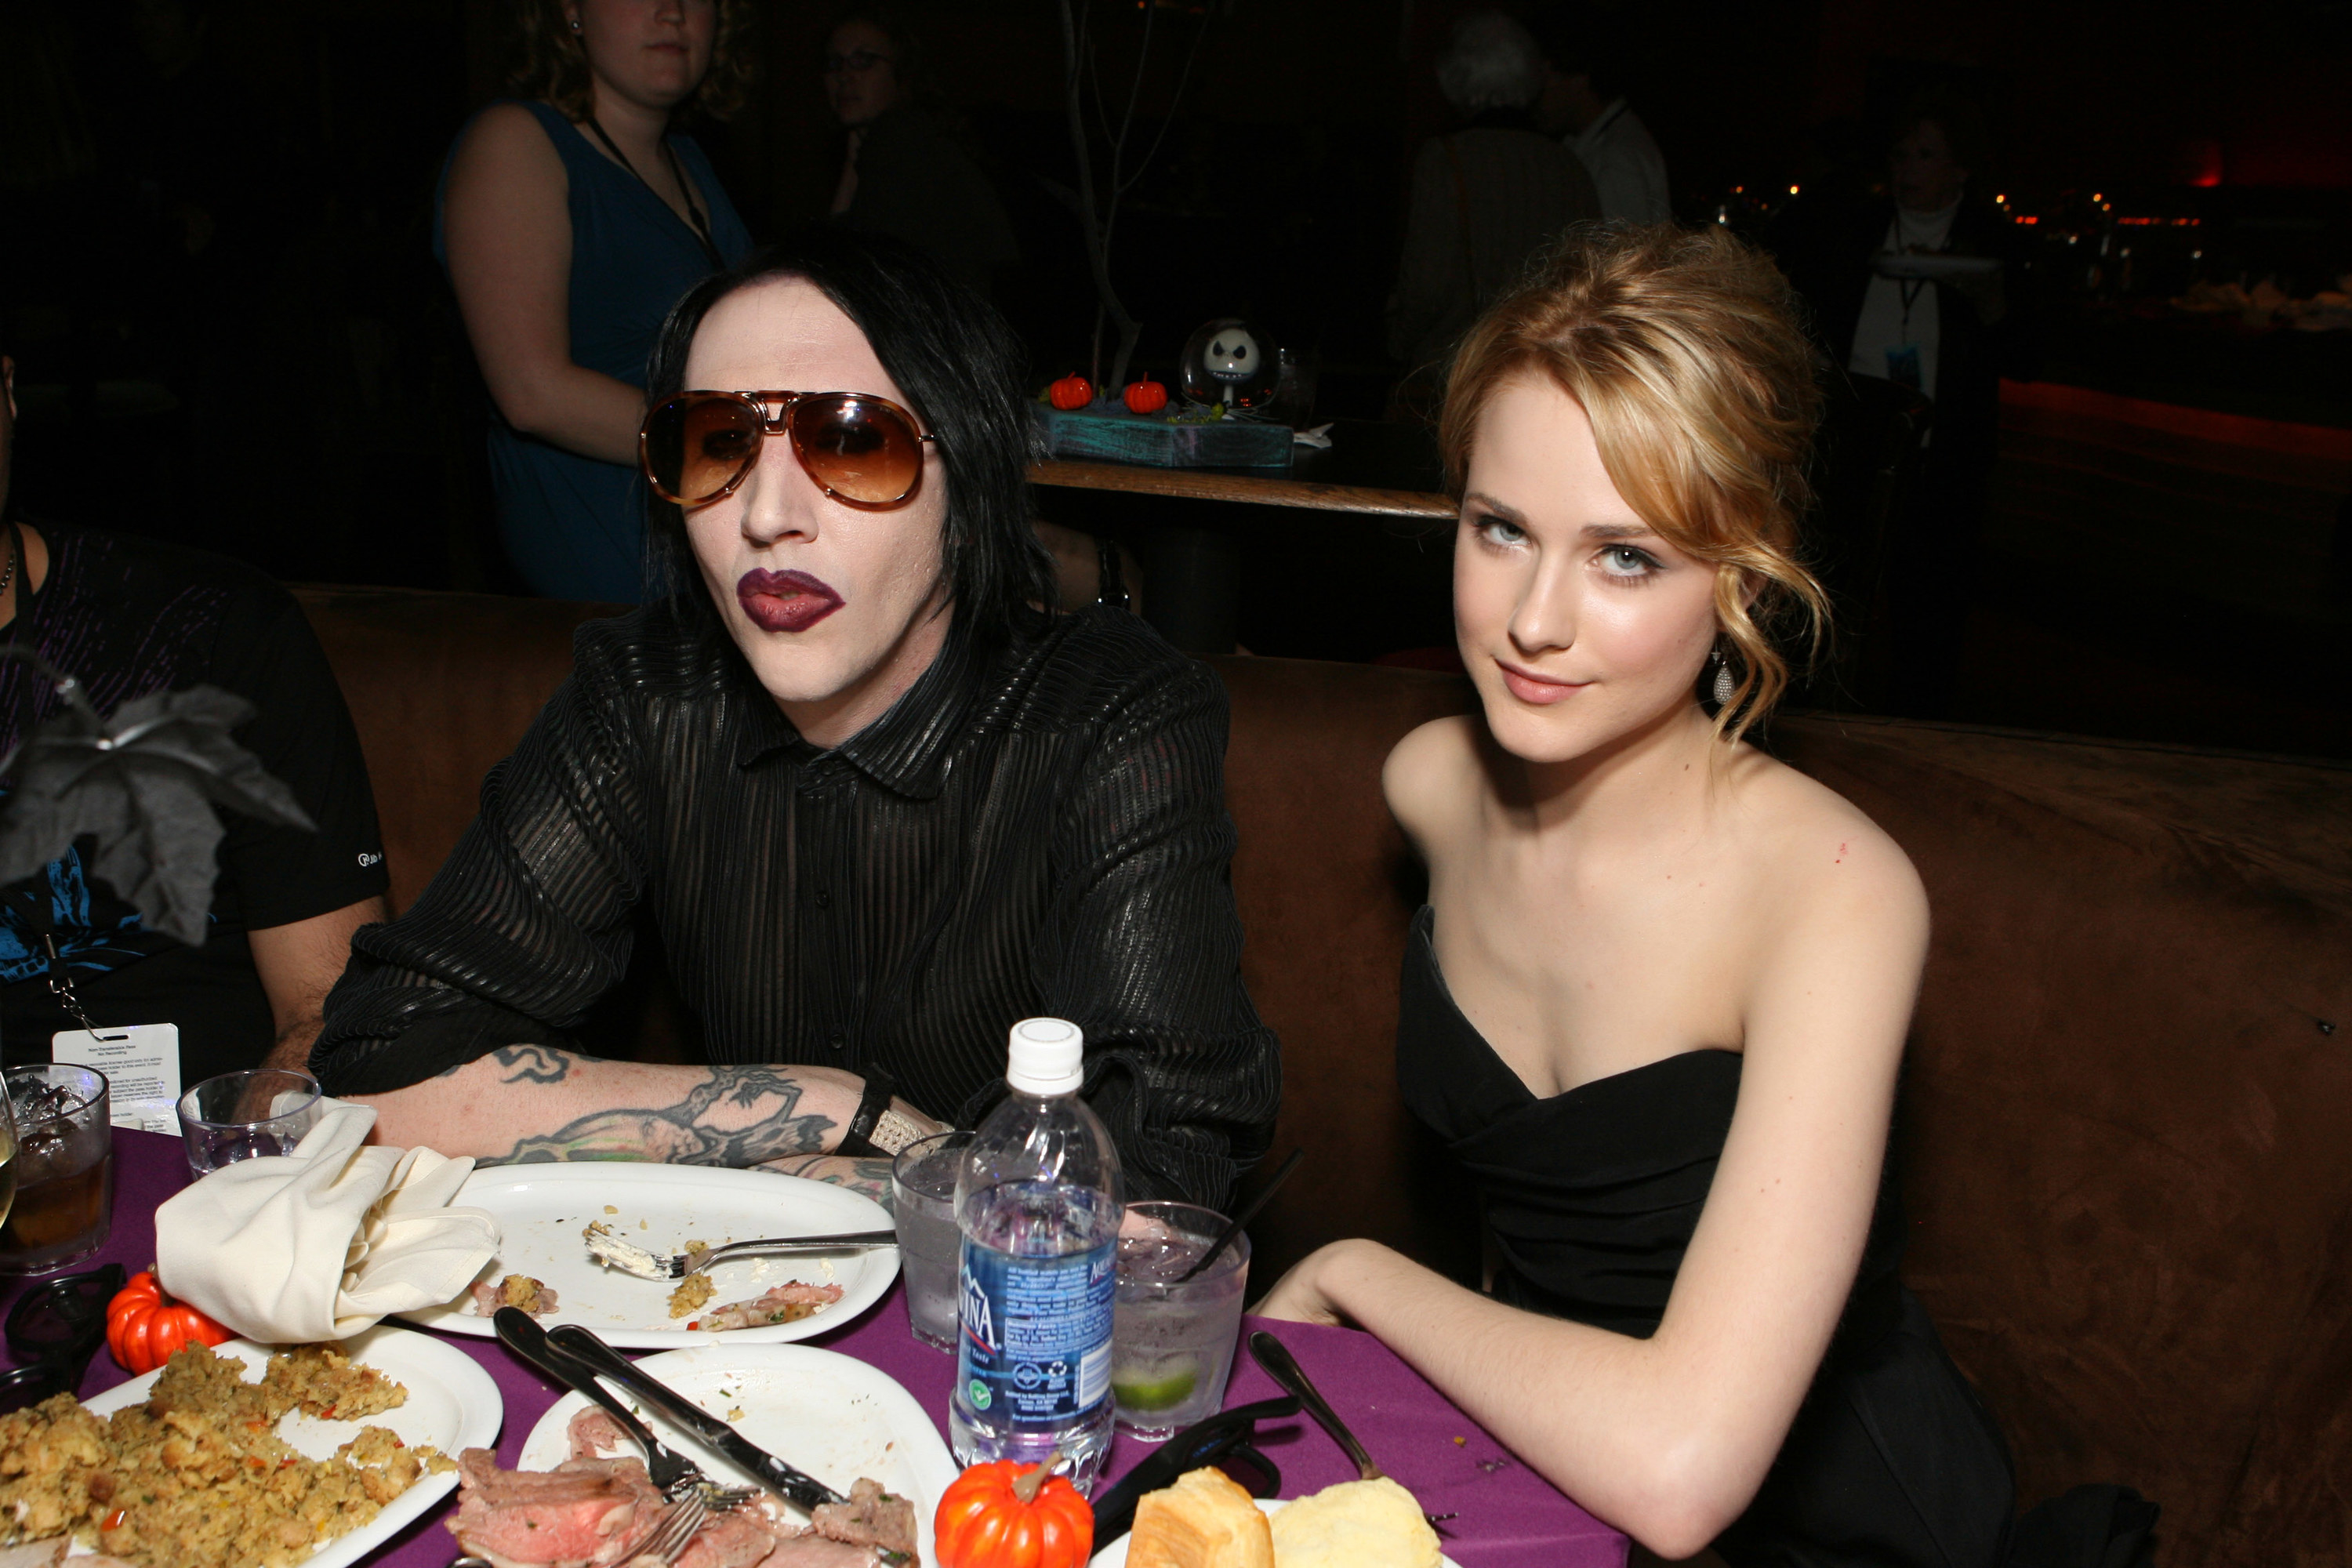 Manson and Wood sit at a table